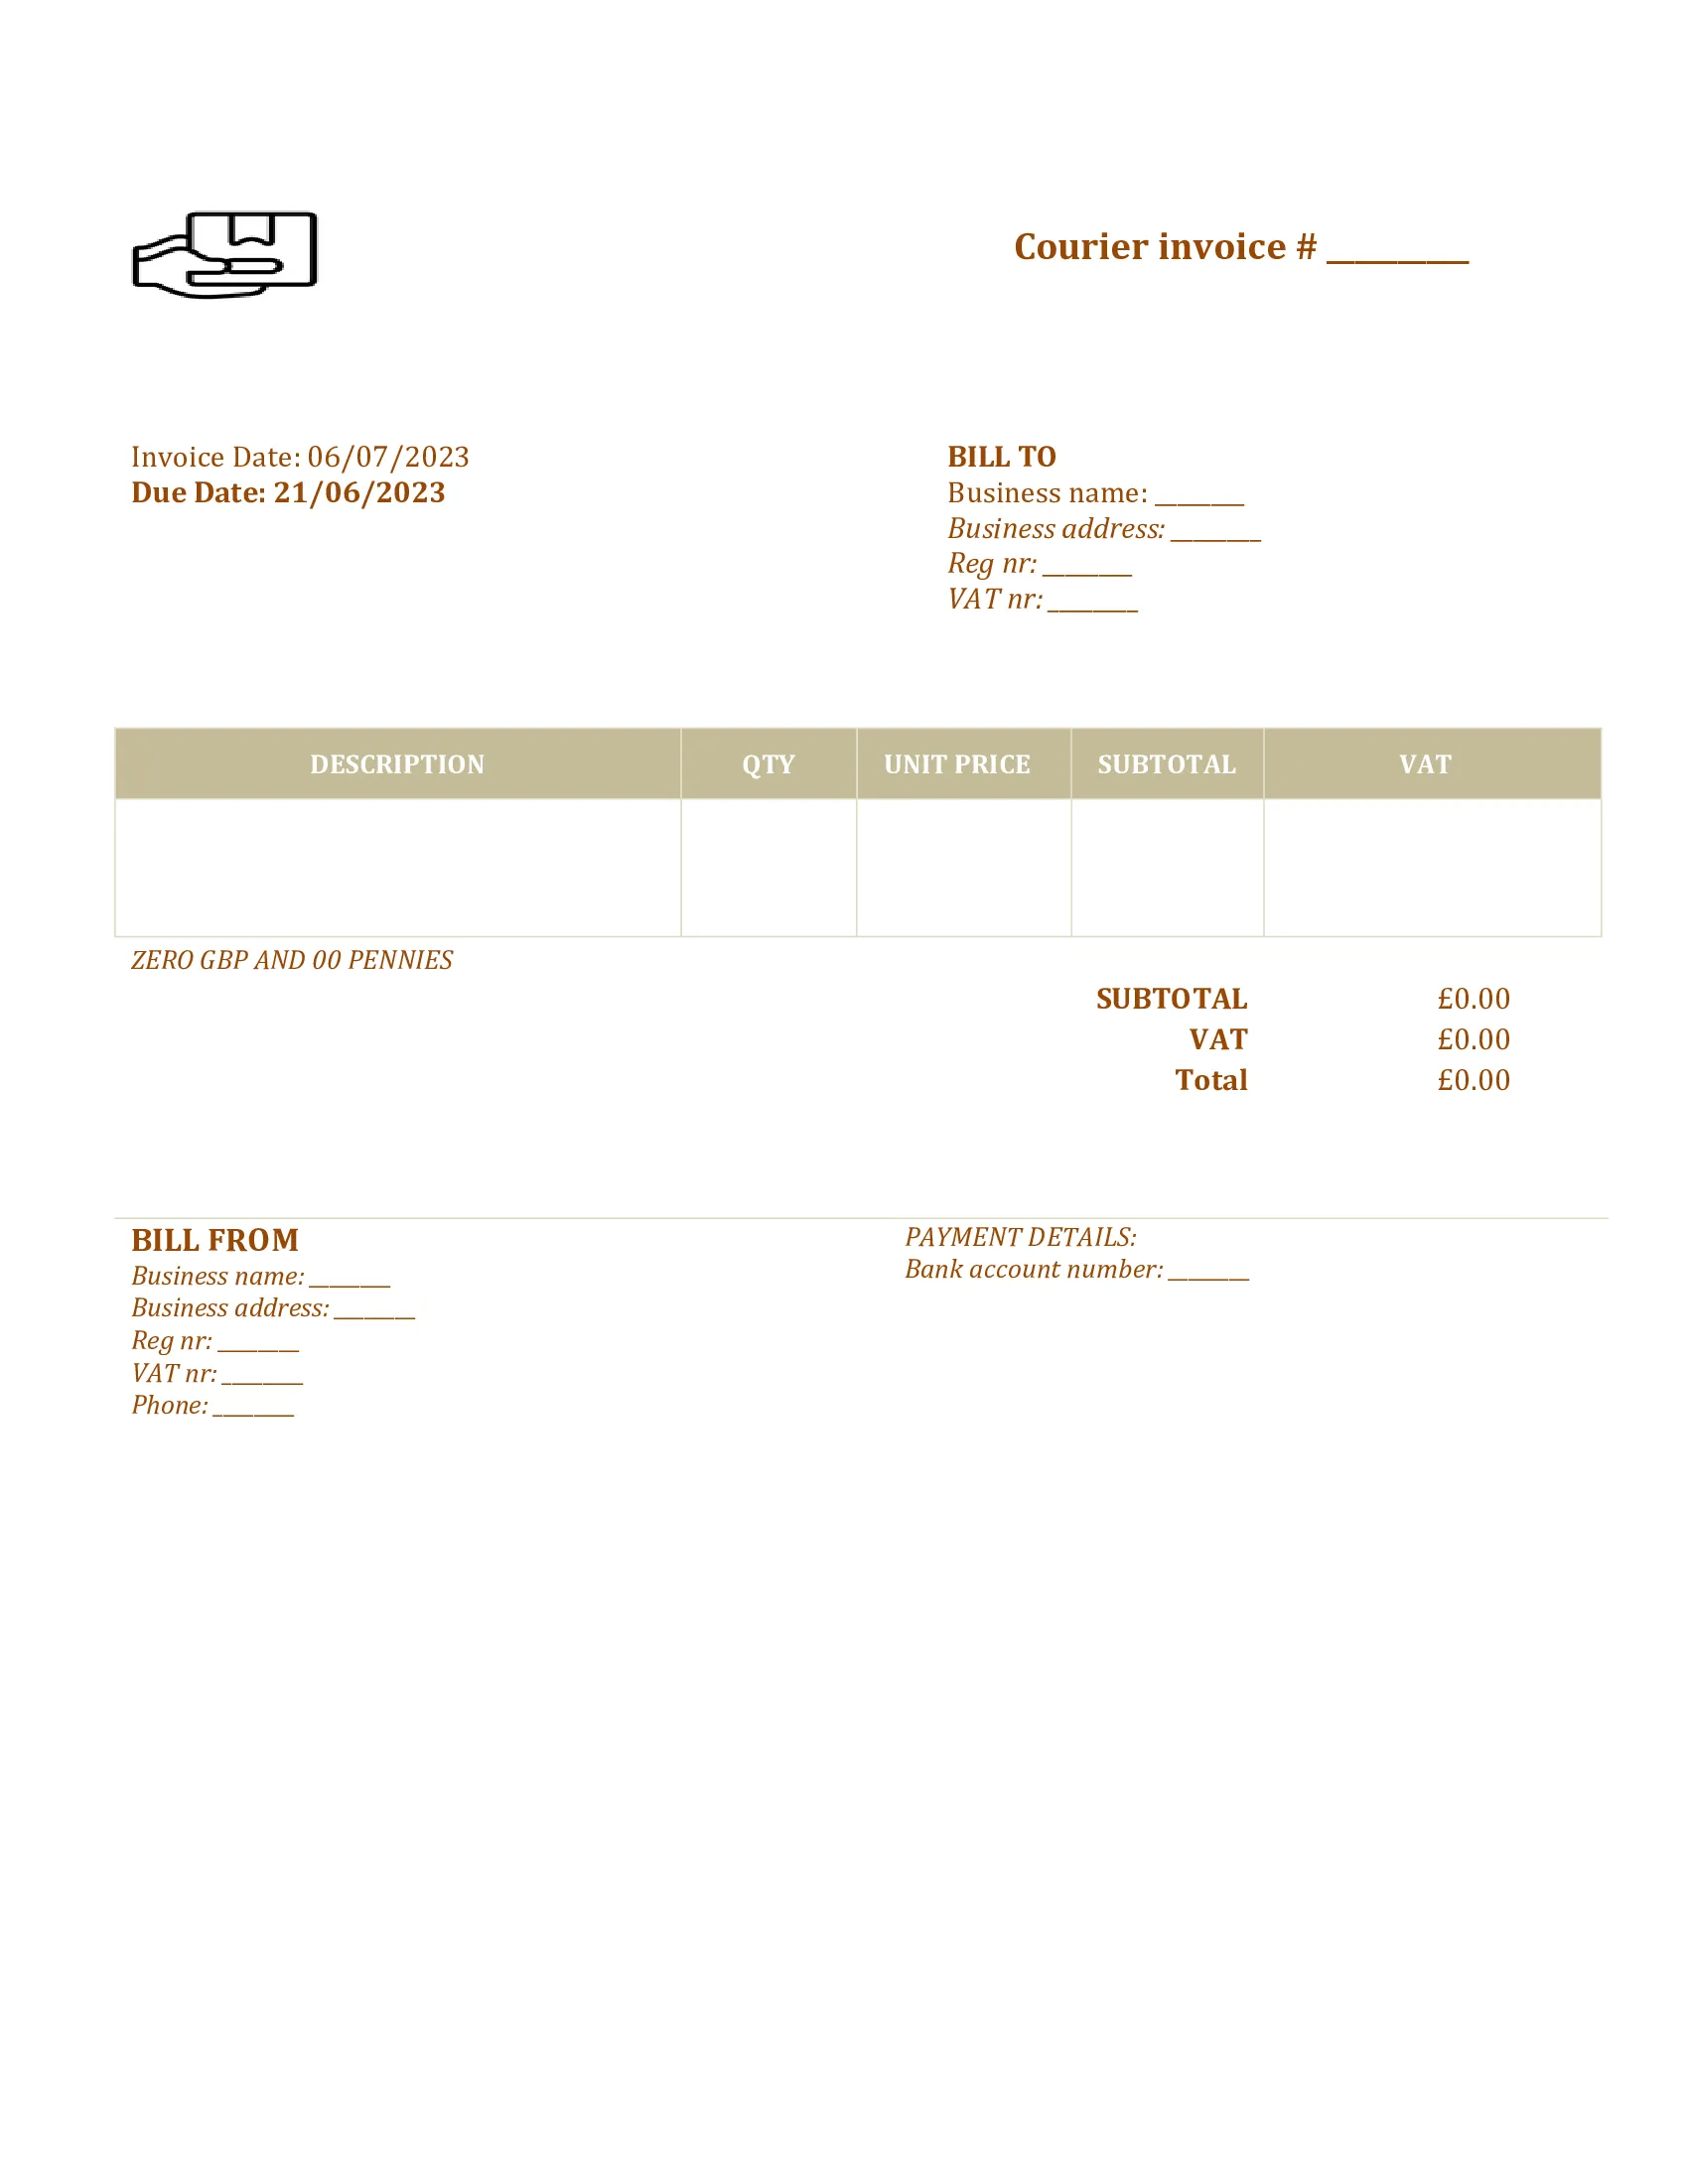 printable courier invoice template UK Word / Google docs